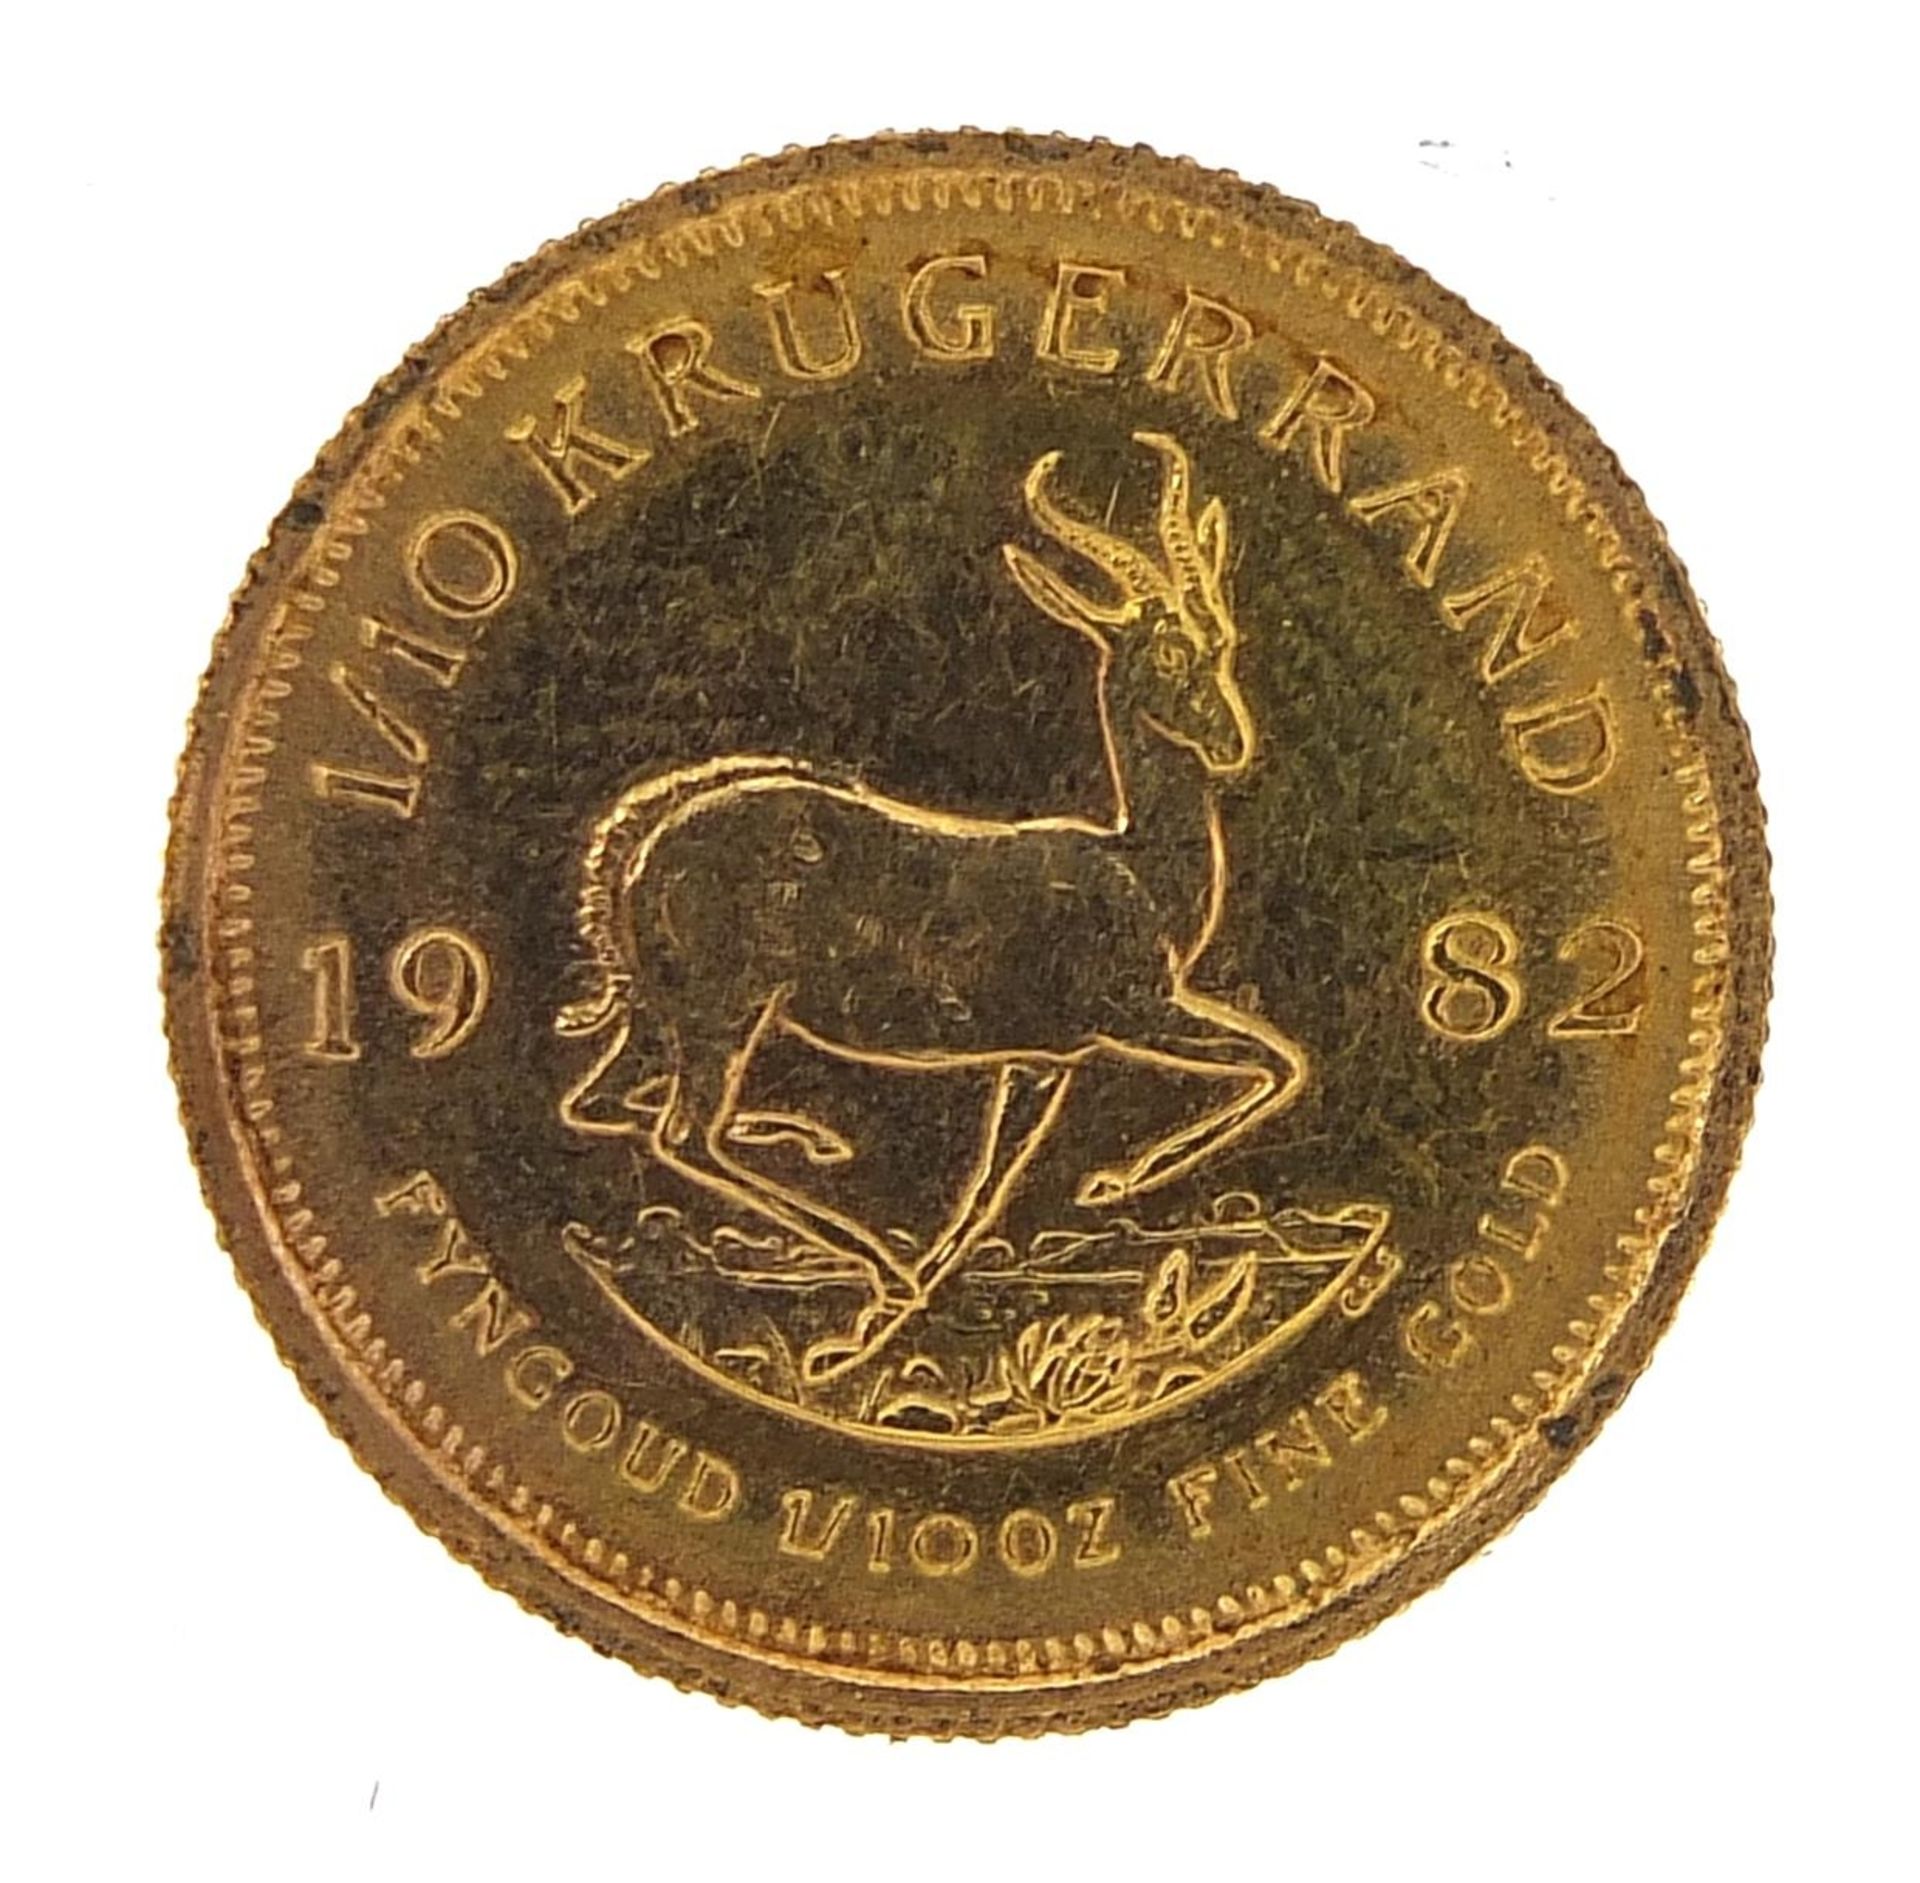 South African 1982 1/10th gold krugerrand - this lot is sold without buyer's premium